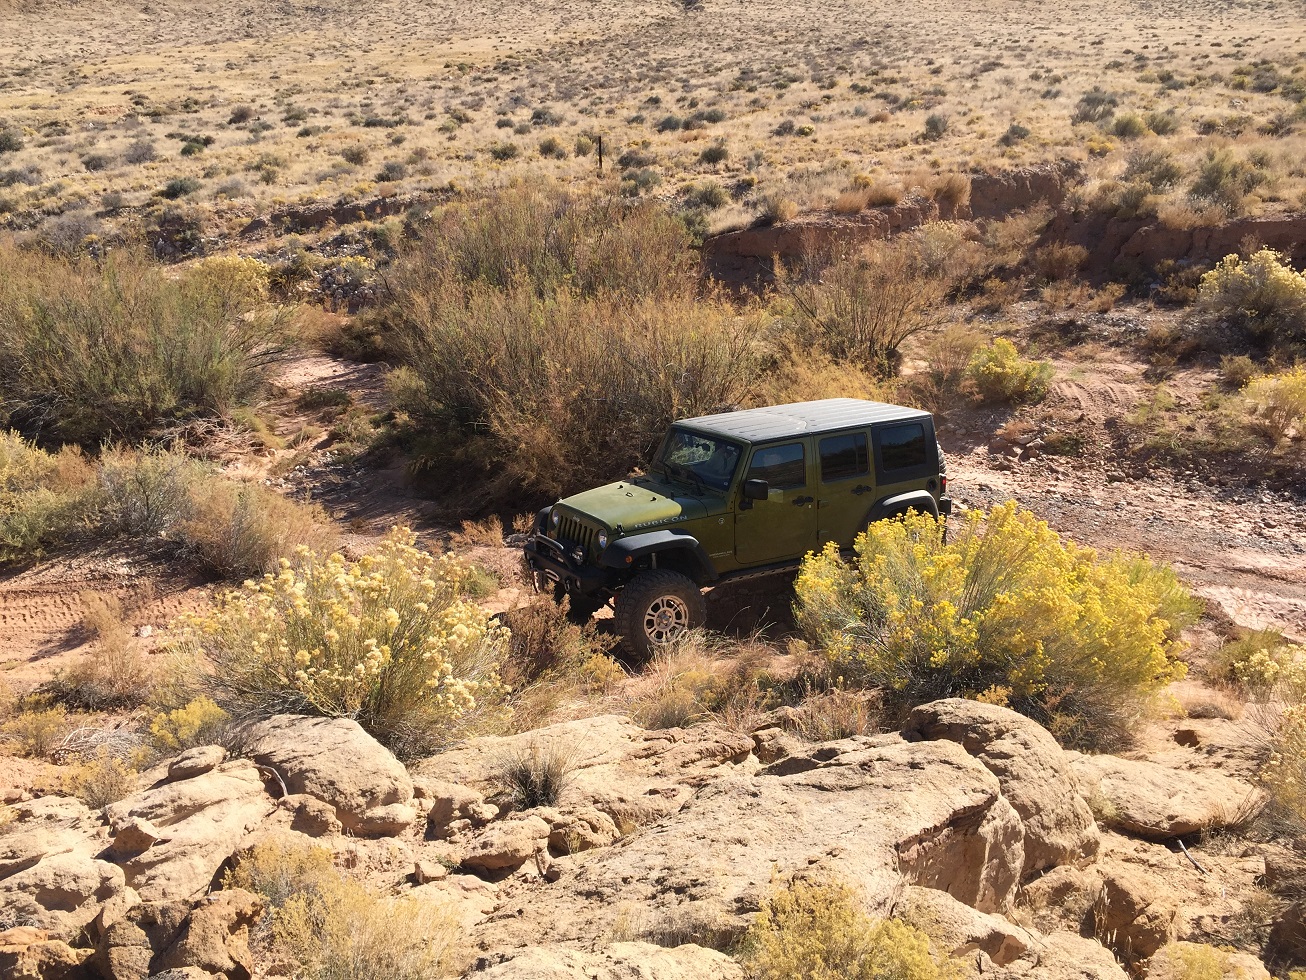 A Jeep crossing the Fort Pearce Wash where it intersects with the Temple Trail